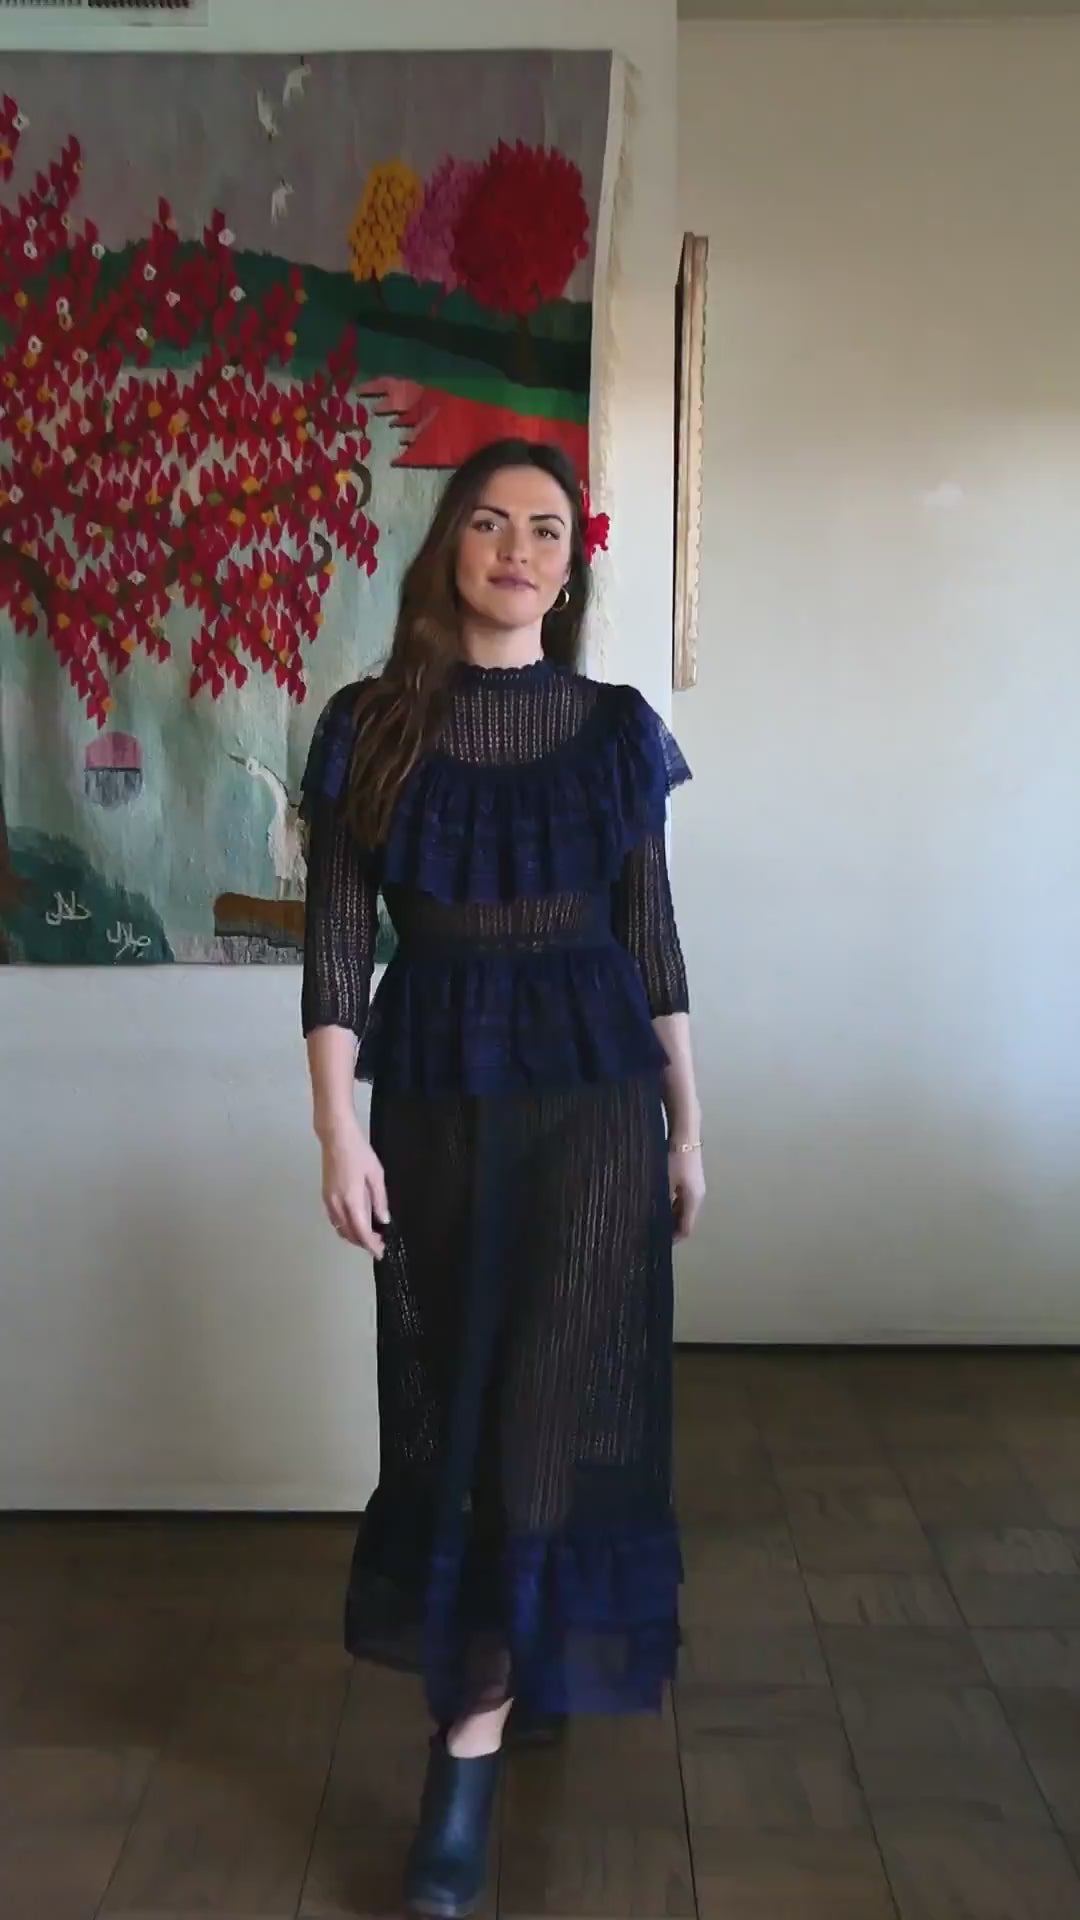 Video of model in dress. A sultry indigo blue Victorian style crochet maxi dress with lace trim and elastic waist. Can be worn with the buttons going down the front or back. Wear with a slip and high black boots for a dramatic evening look.  Size: Fits small to medium   Measurements:  Bust 31"-36” Waist 26”- 34" Length 52” Shoulder width 15” Sleeve 18” Hip 46"